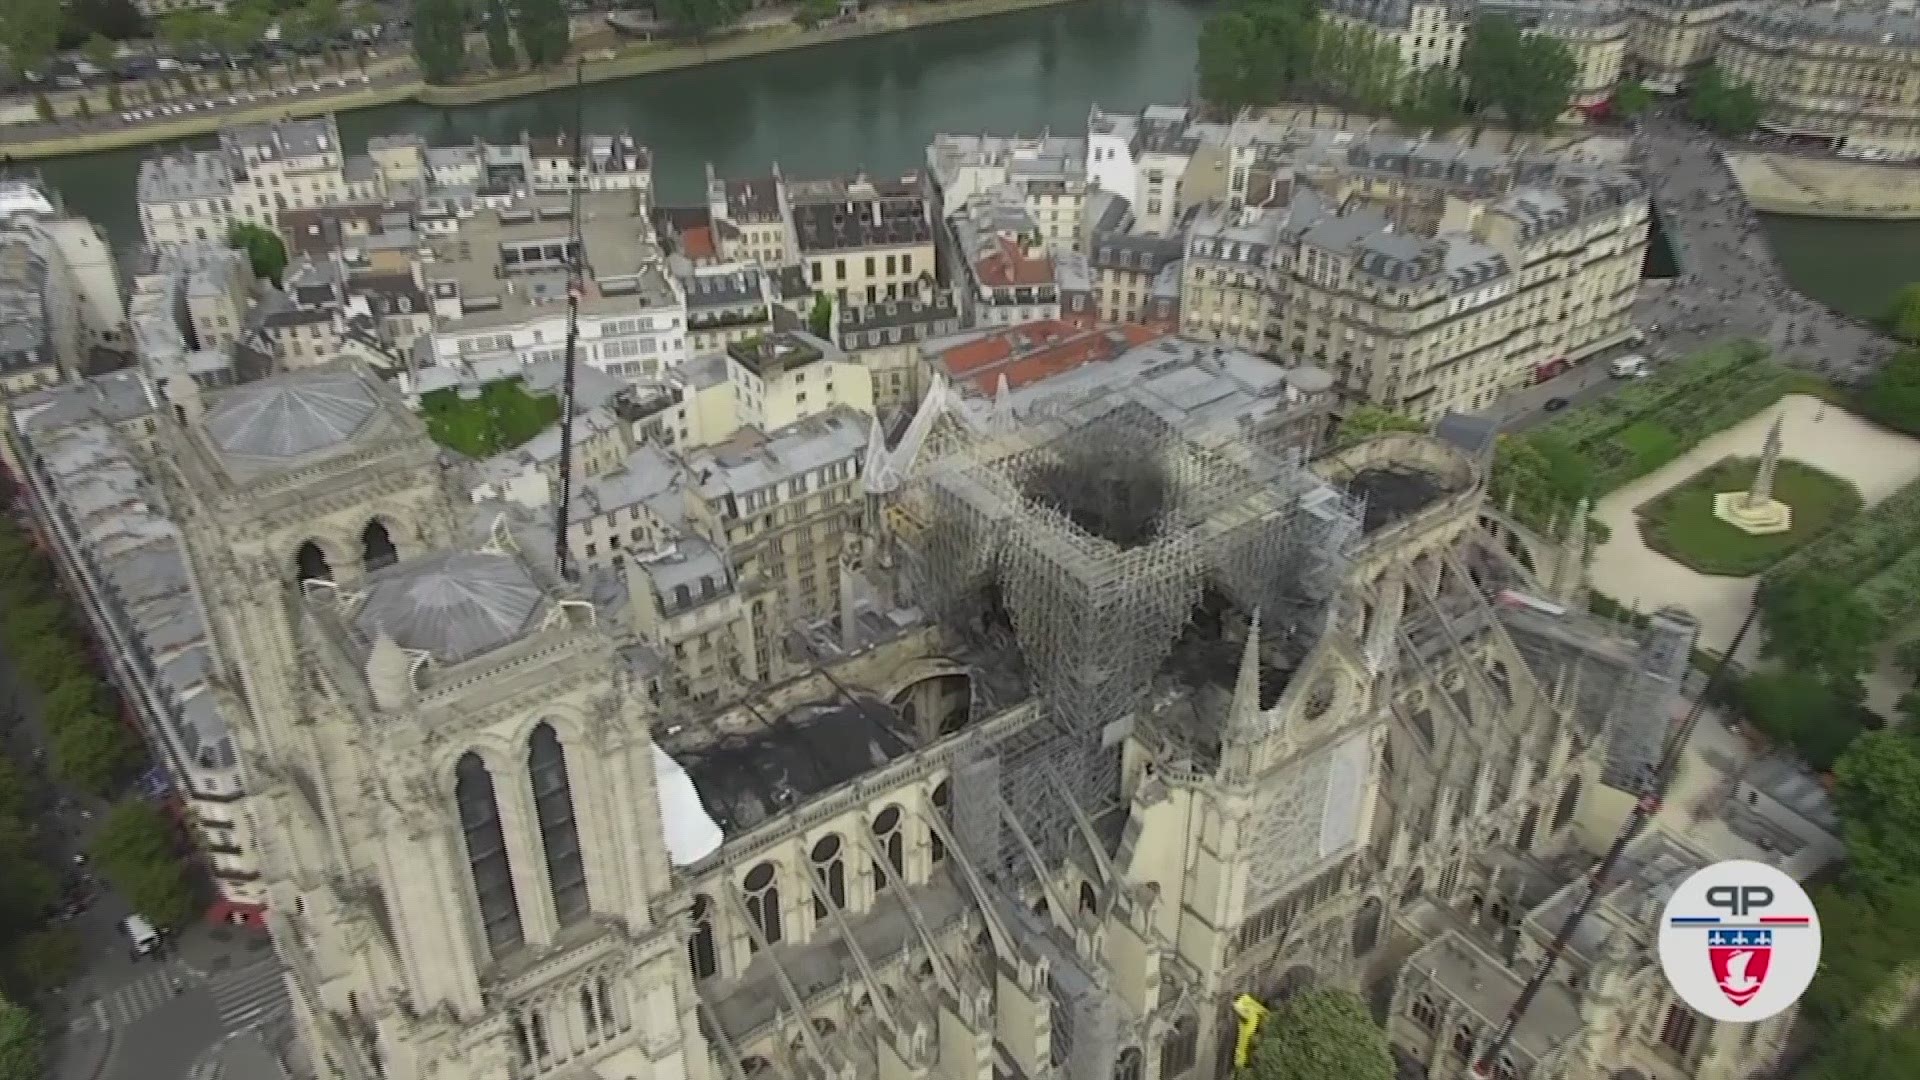 More than 1,100 architects and heritage experts have called on French President Emmanuel Macron to take the necessary time to rebuild Notre Dame.